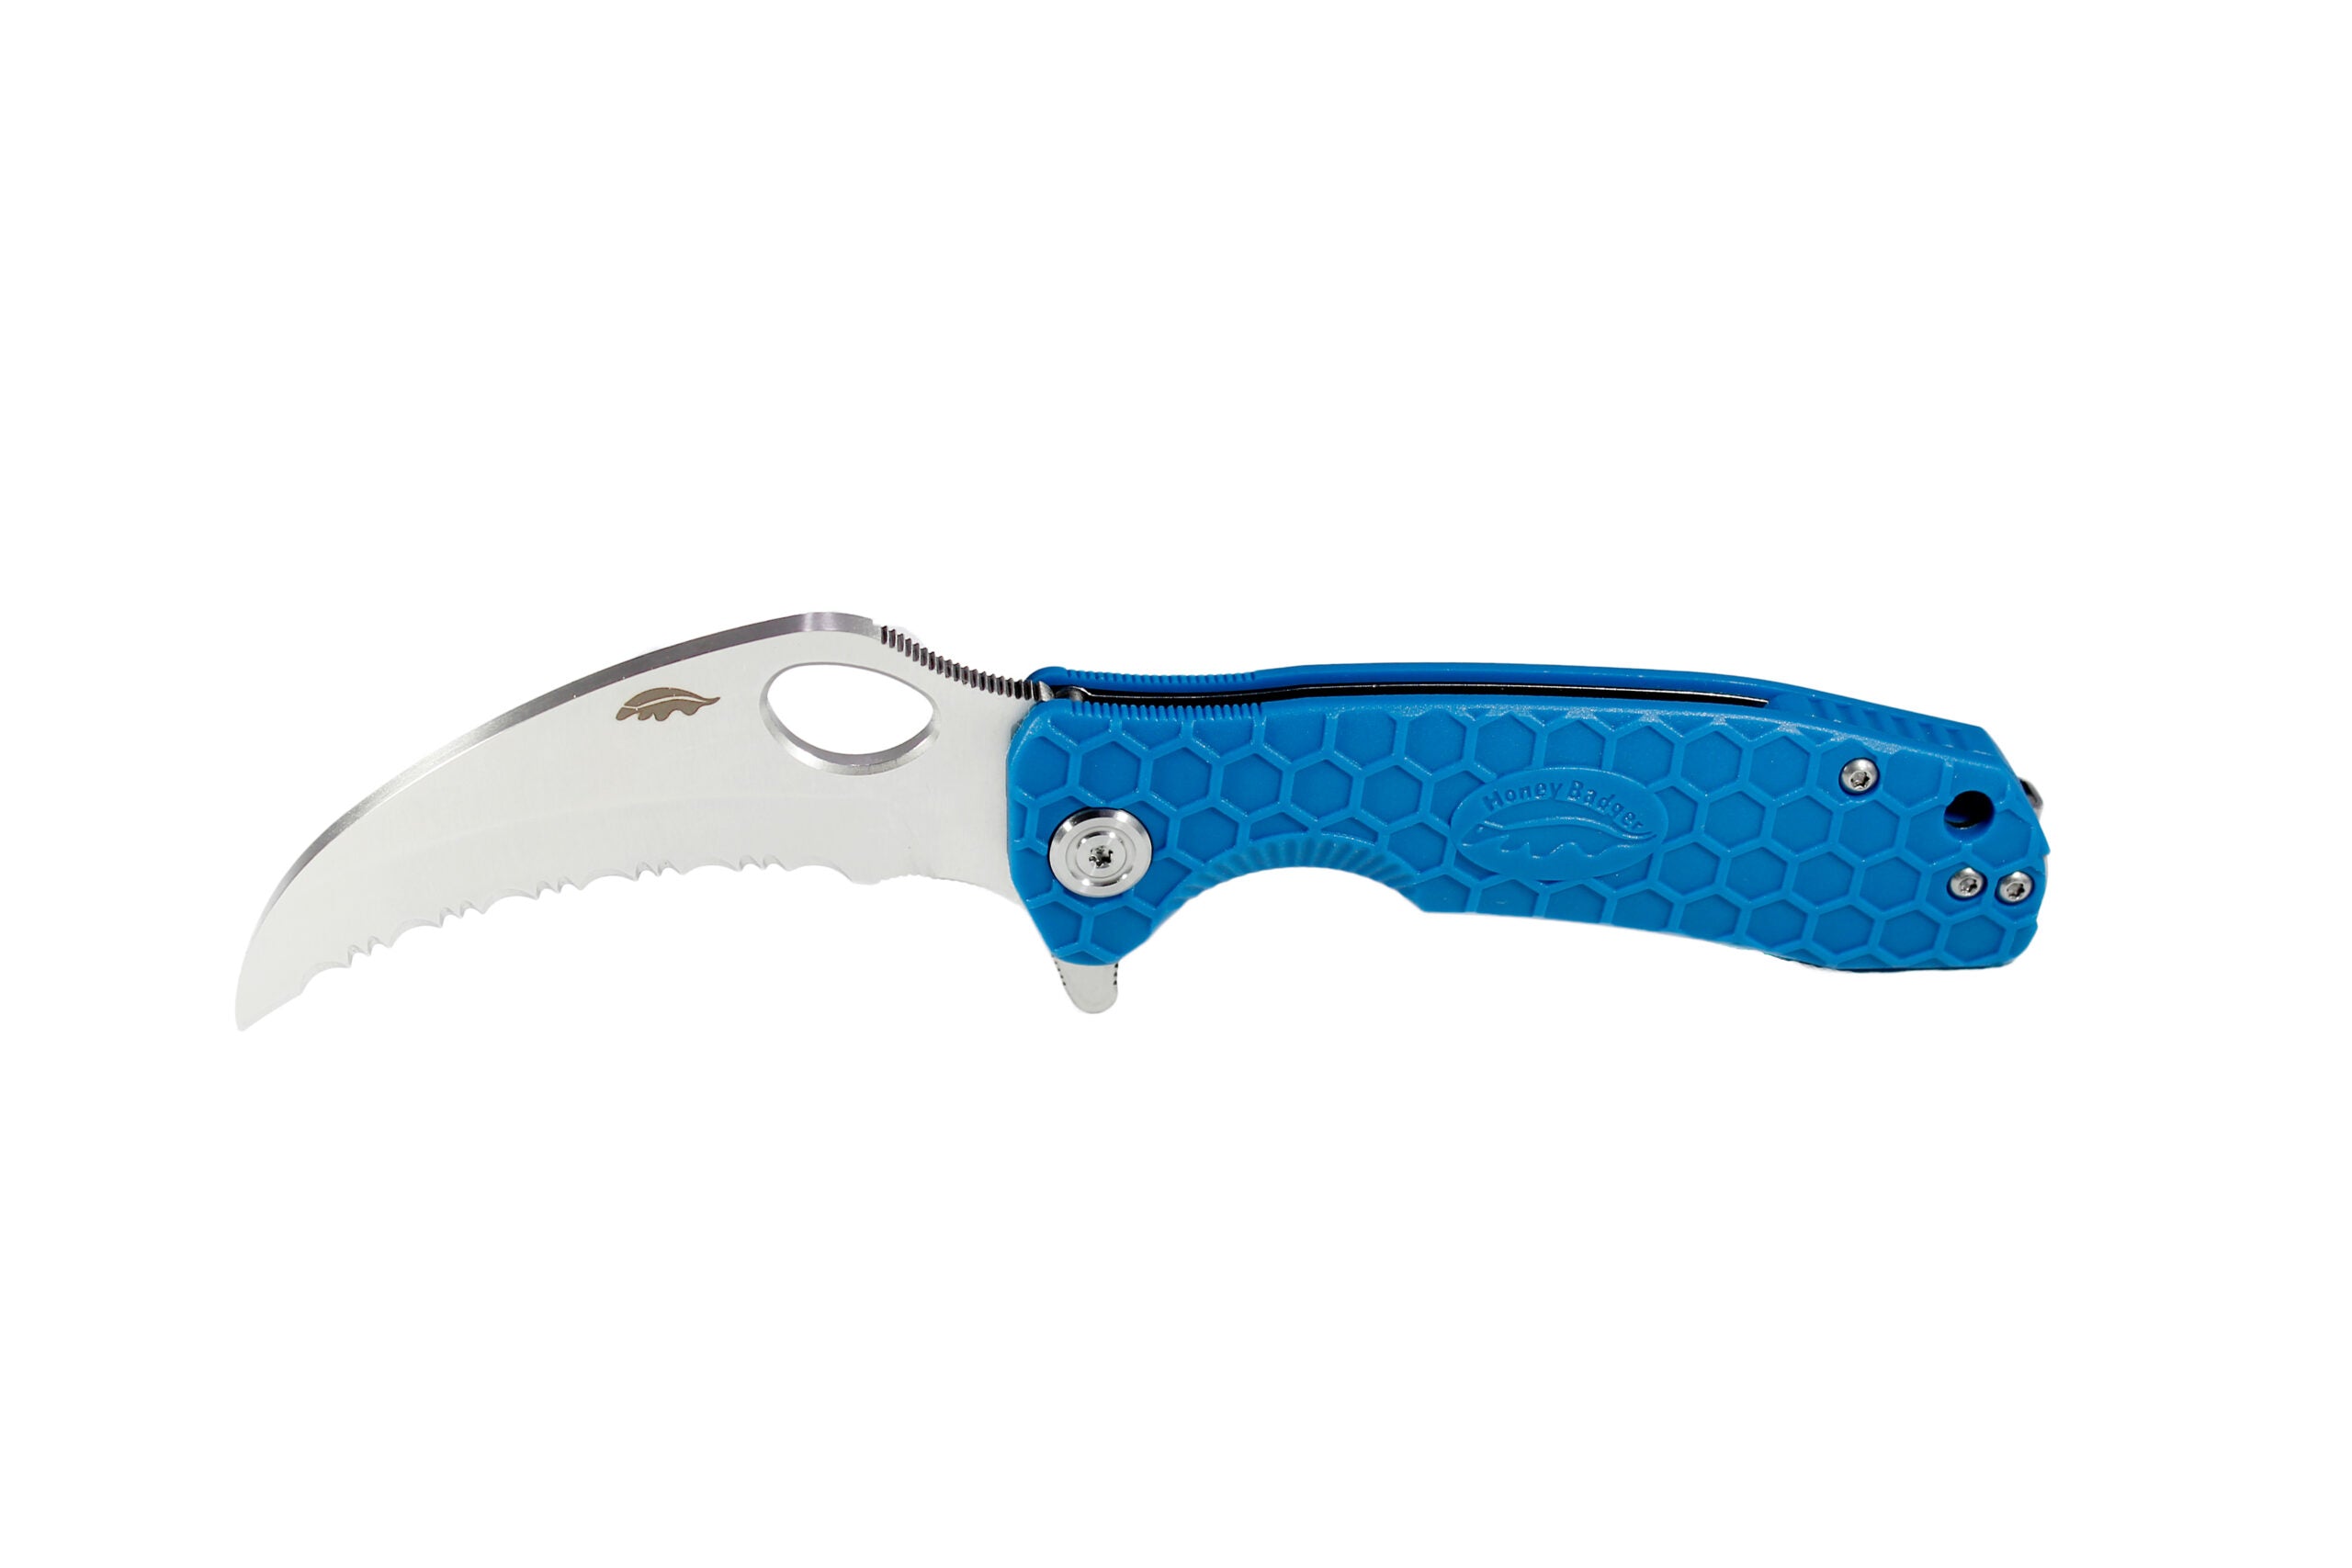 Honey Badger Claw L/R Large - Blue Serrated